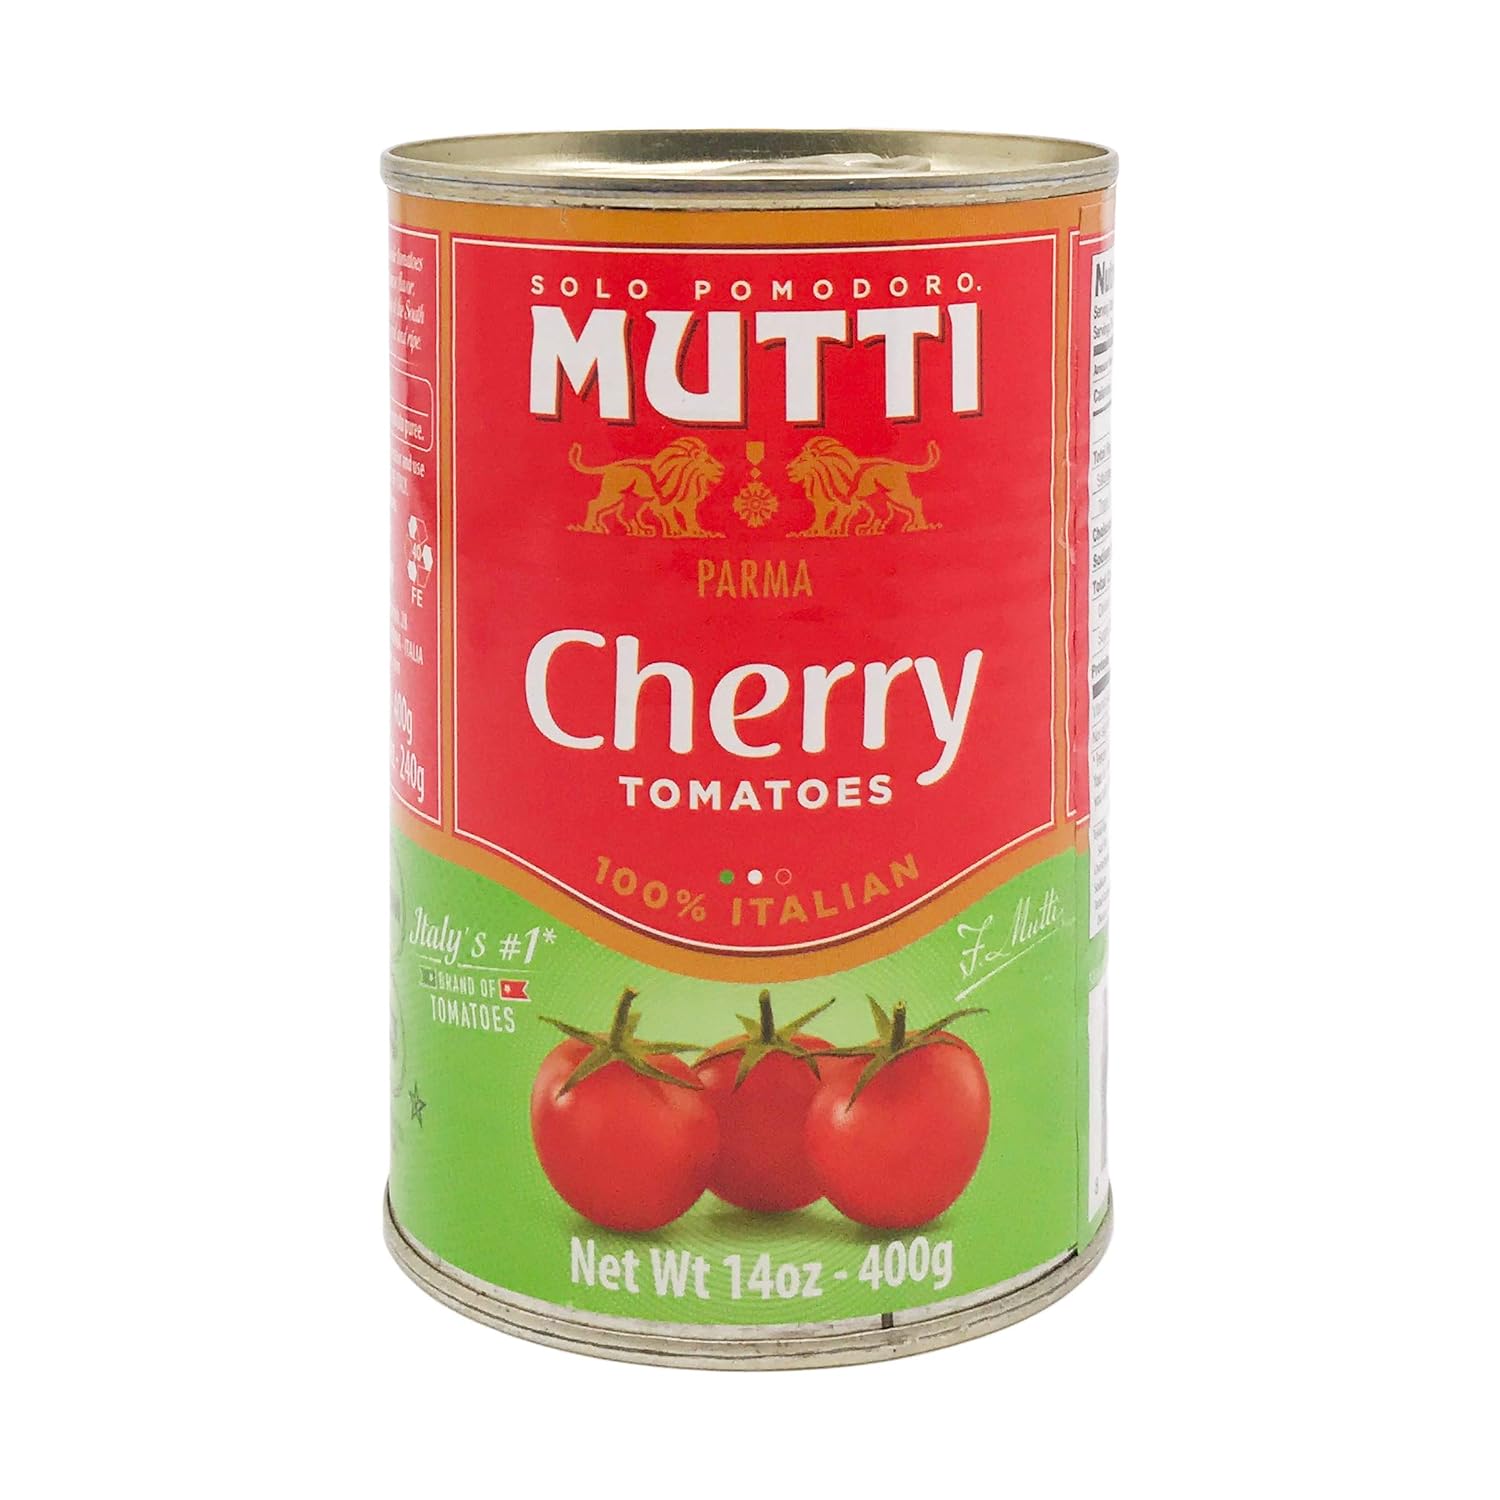 Mutti Cherry Tomatoes (Ciliegini), 14 oz. | 1 Pack | Italy’s #1 Brand of Tomatoes | Fresh Taste for Cooking | Canned Tomatoes | Vegan Friendly & Gluten Free | No Additives or Preservatives